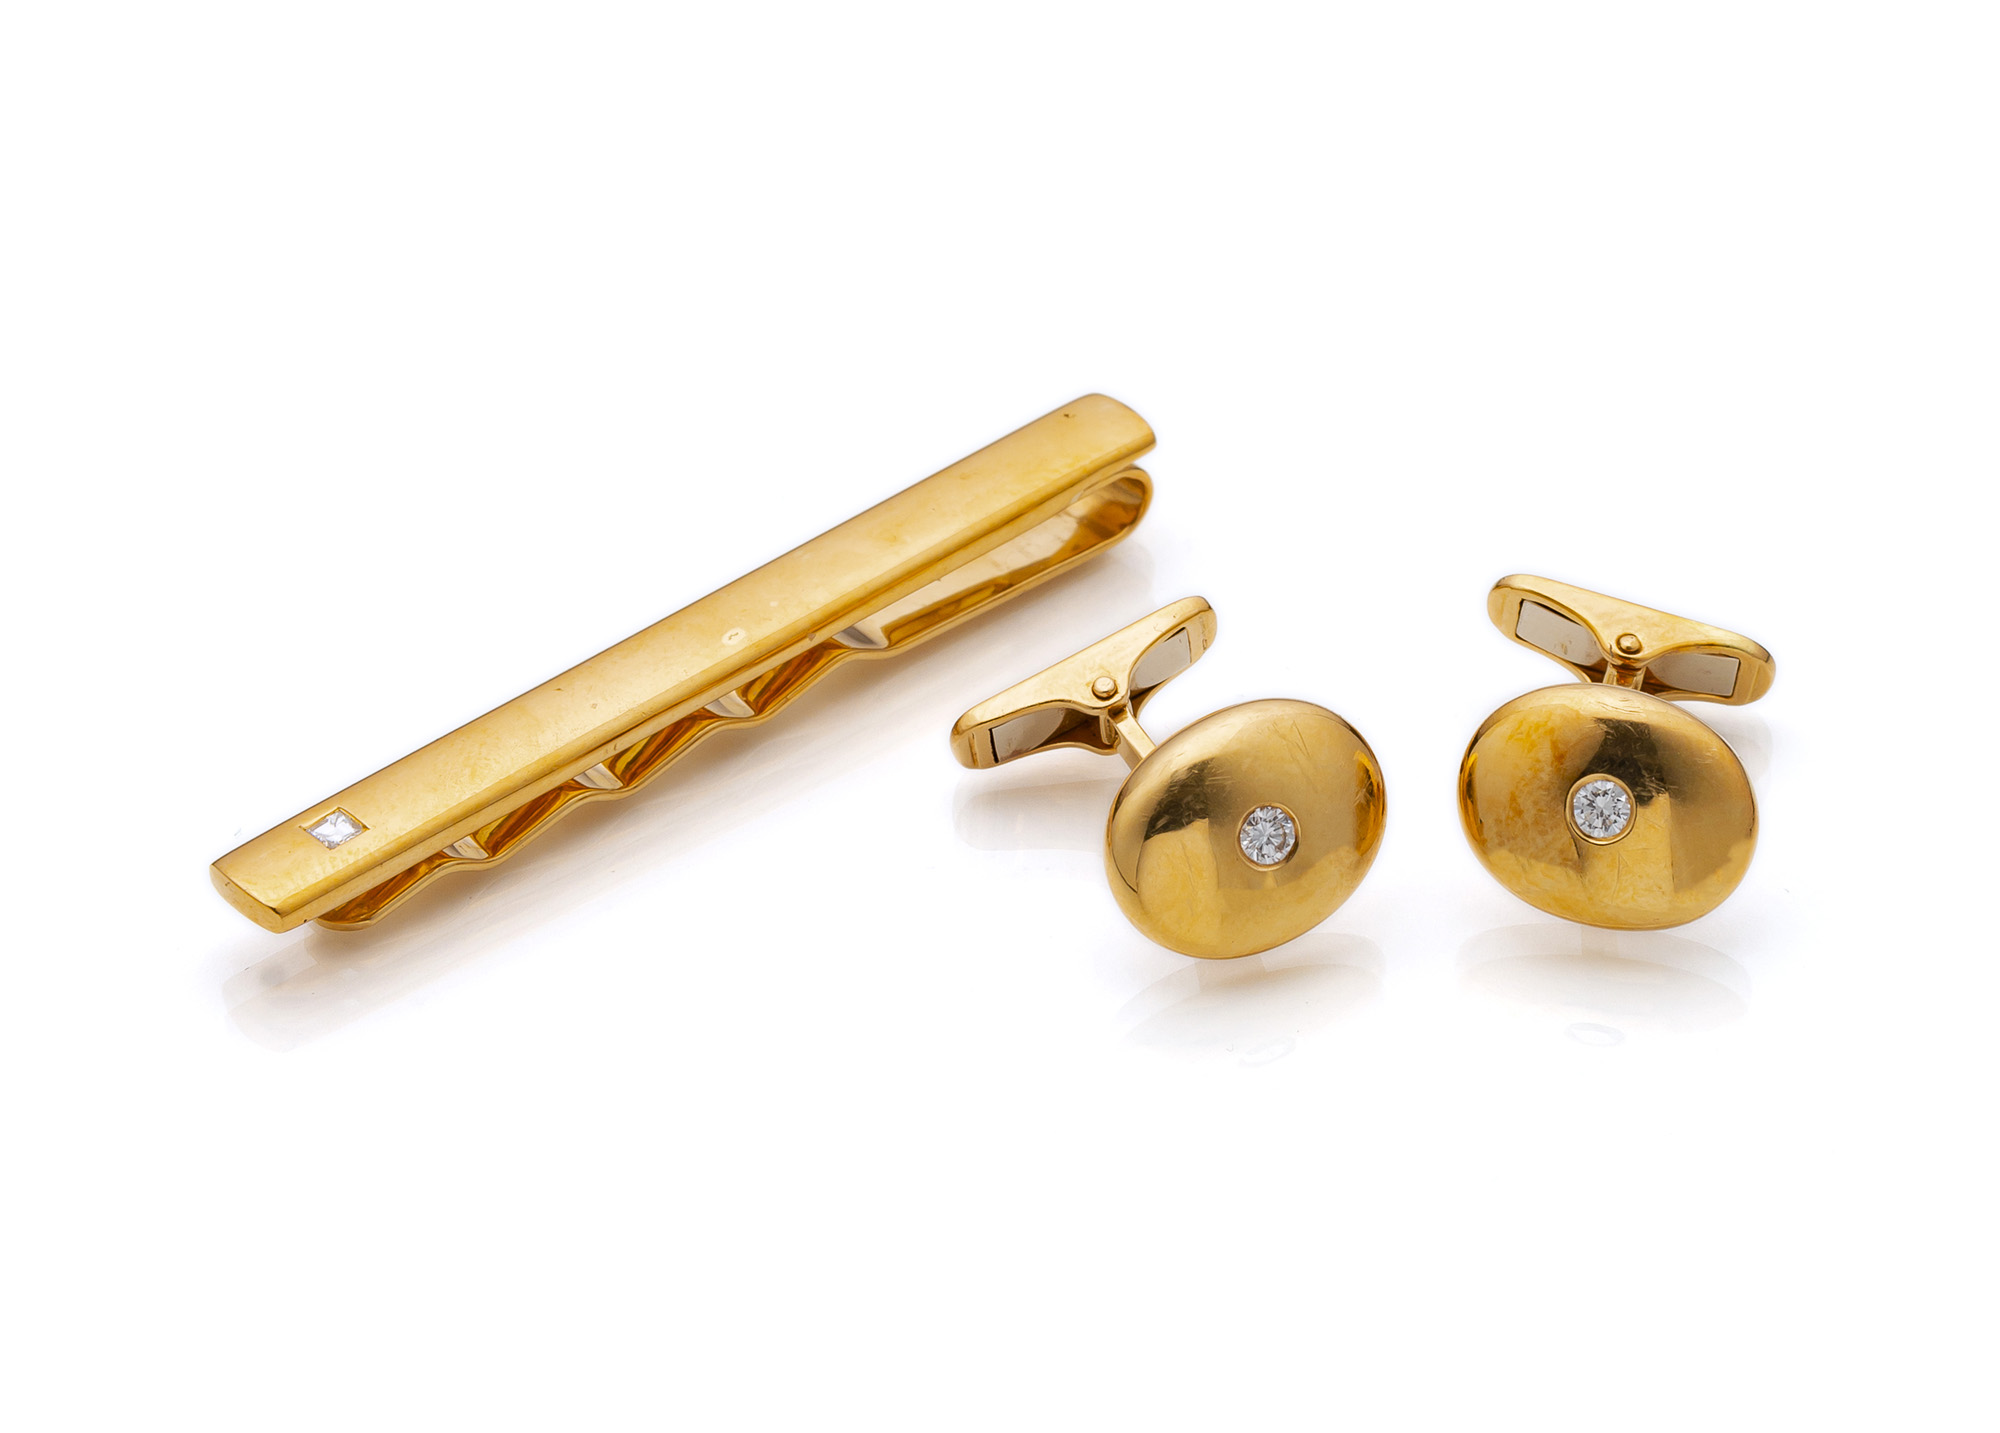 <b>A PAIR OF CUFF LINKS AND A TIE CLIP</b>